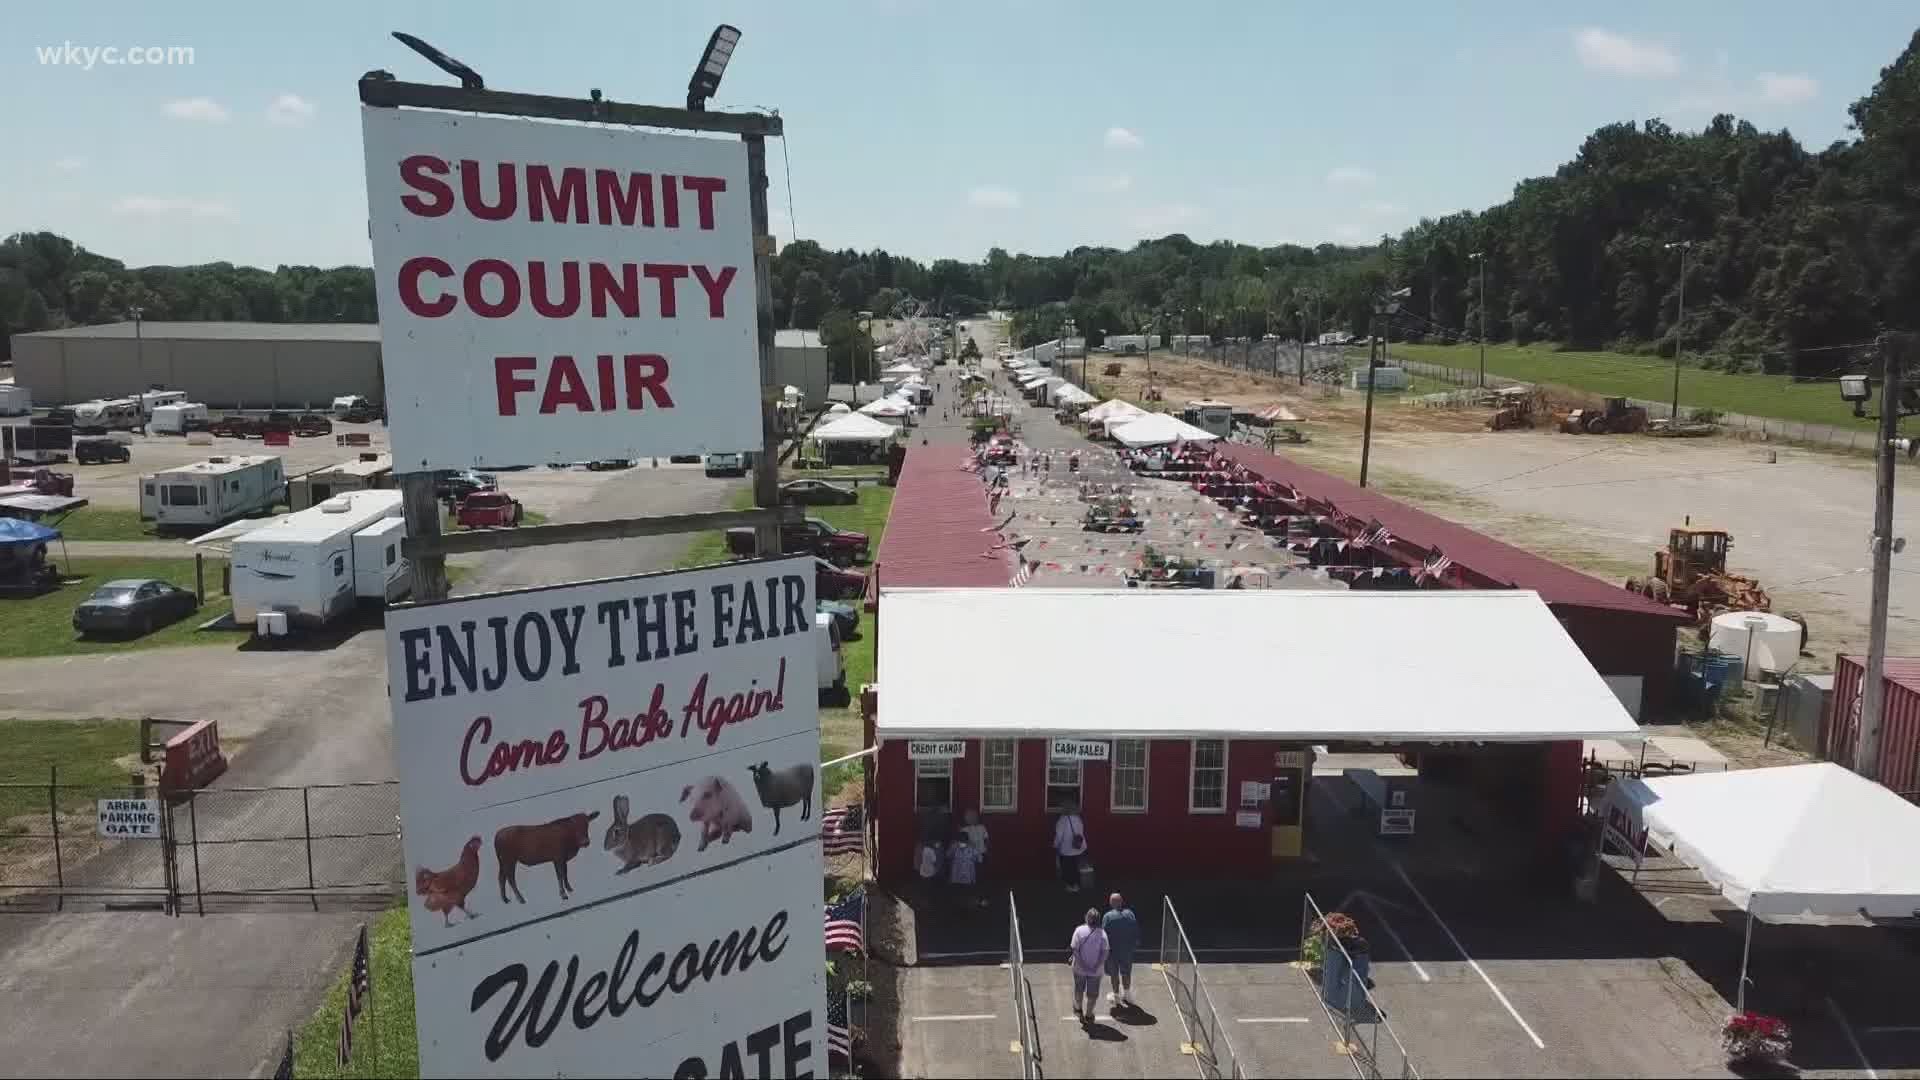 County fairs, playgrounds, and Little League baseball are just some of the things making a comeback this summer. Mark Naymik reports.